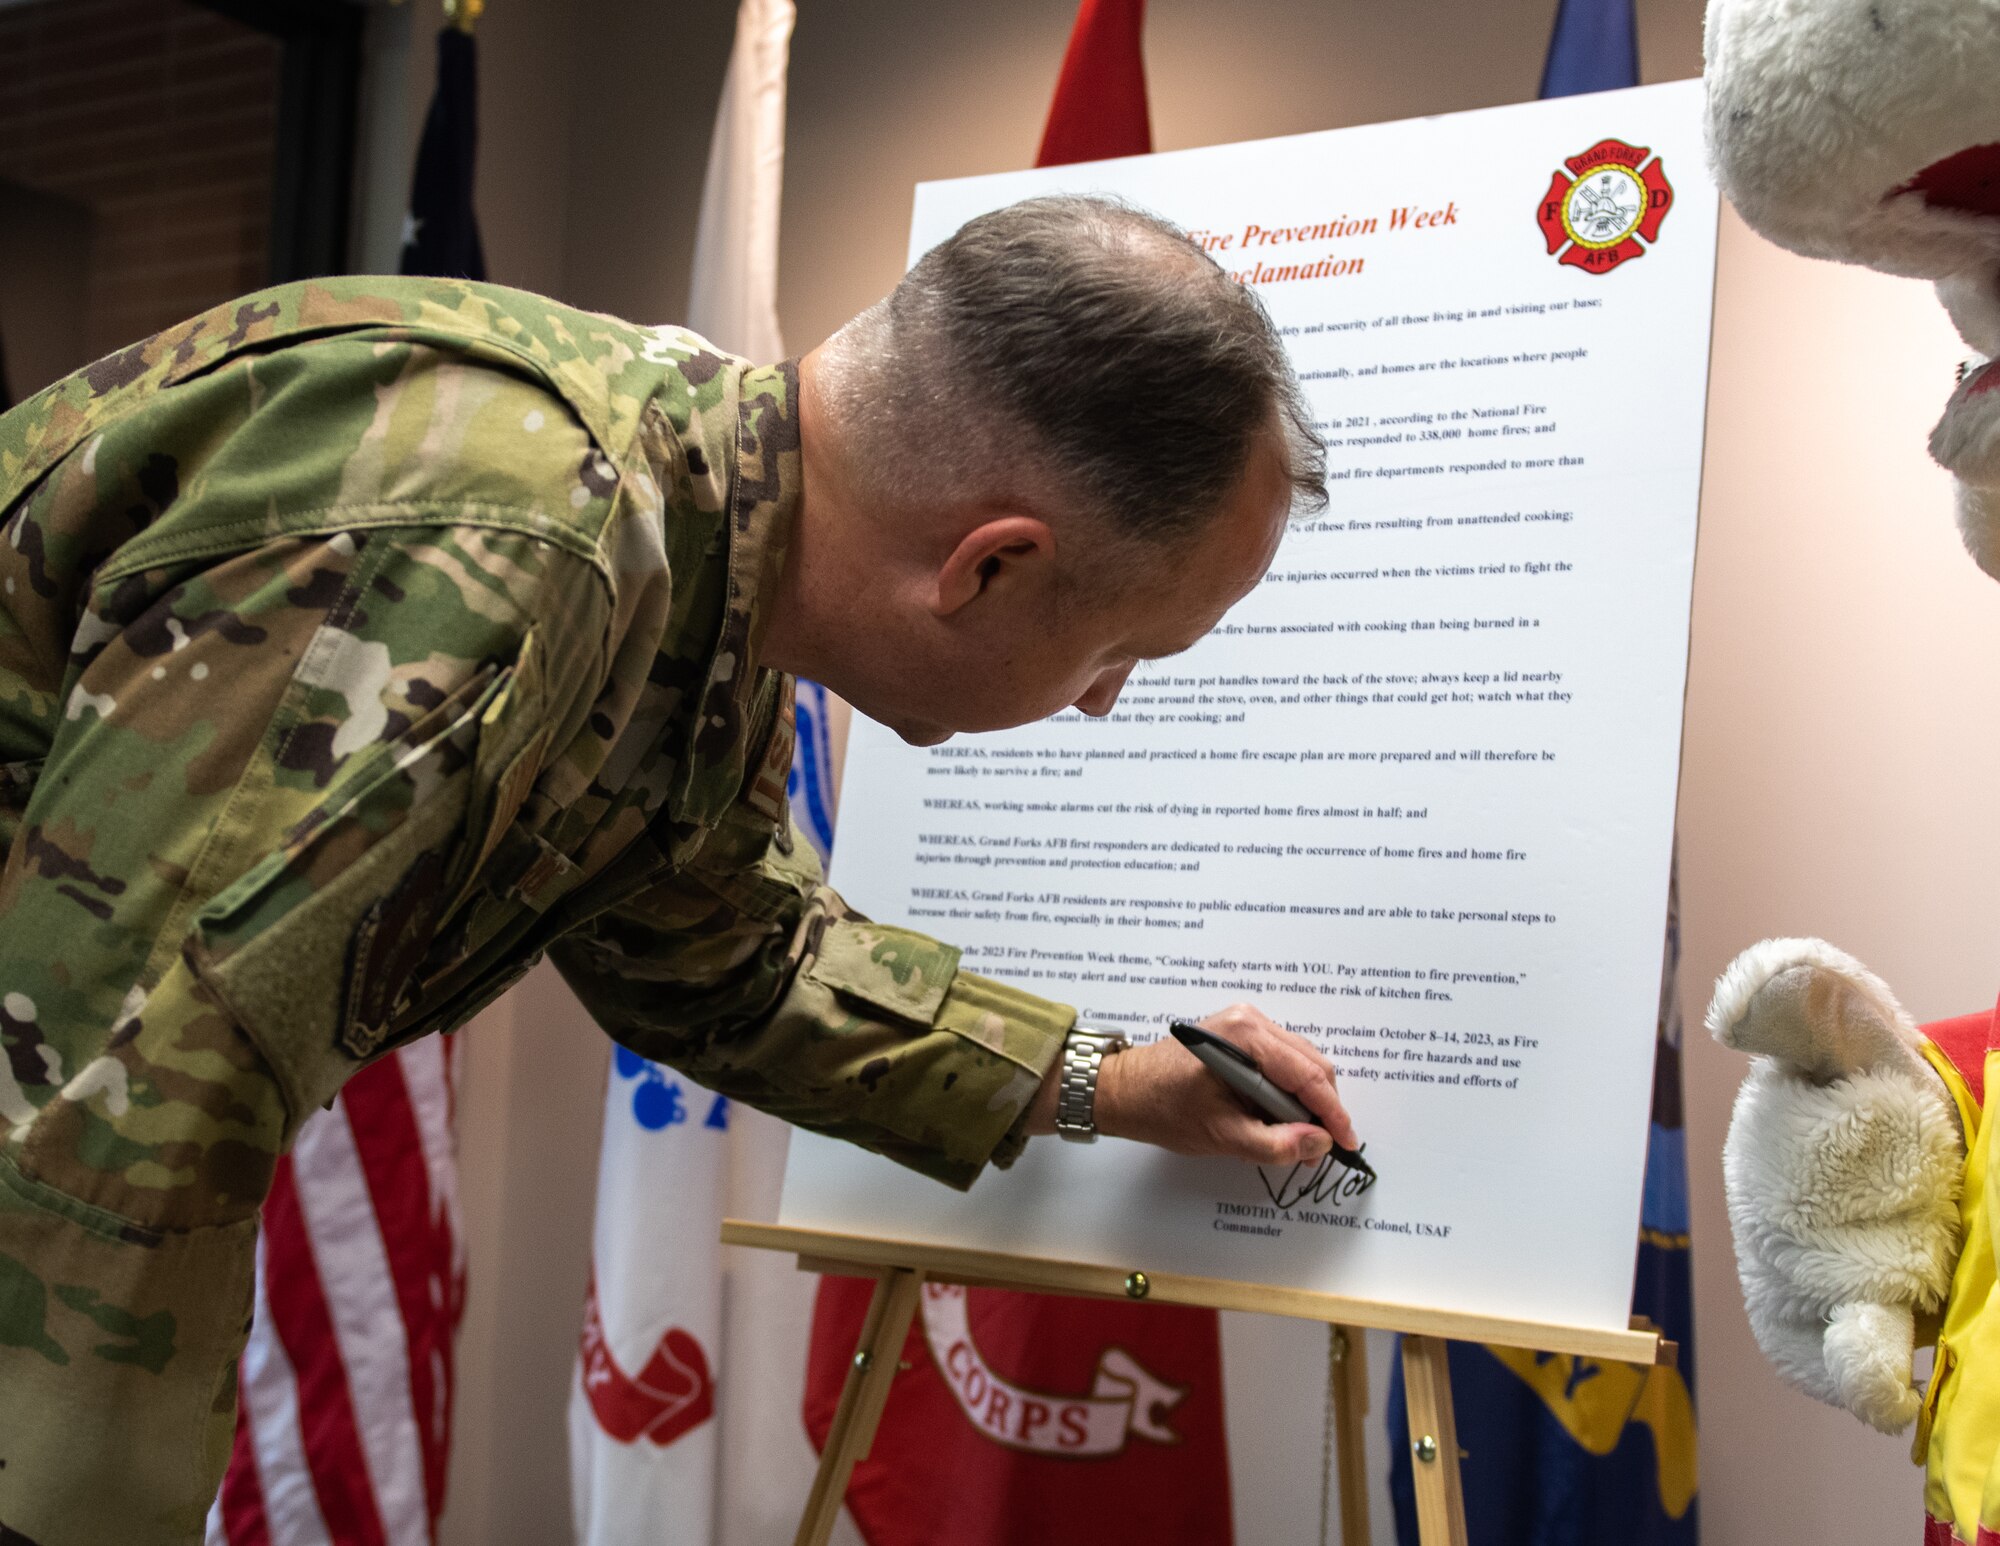 A man in a green uniform signs a large sheet of paper